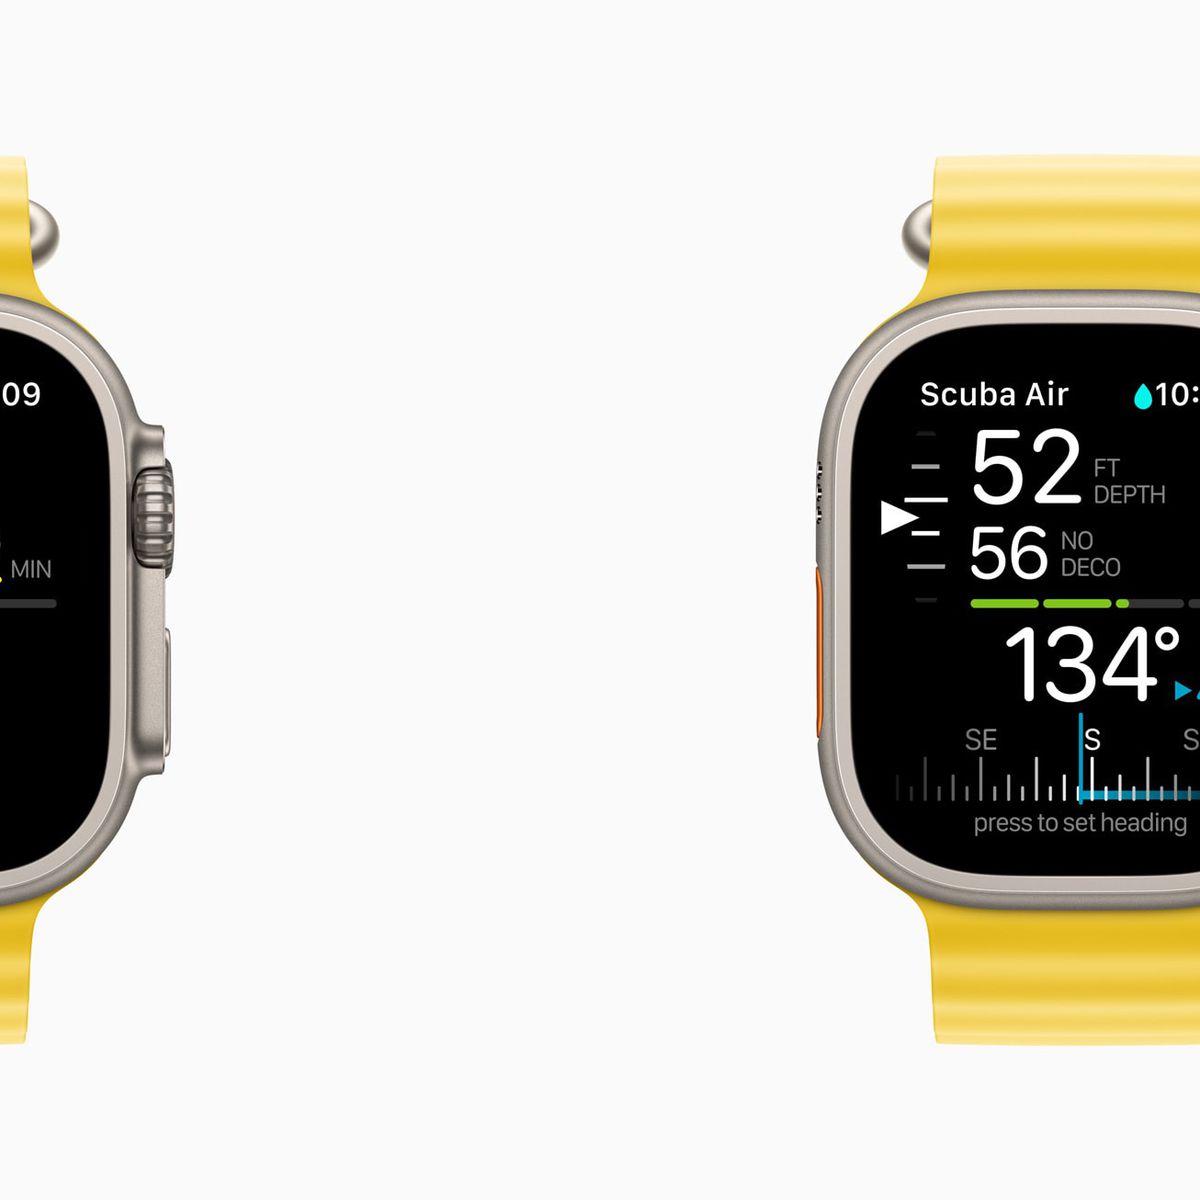 Reach new depths with the Oceanic+ app and Apple Watch Ultra - Apple (CA)